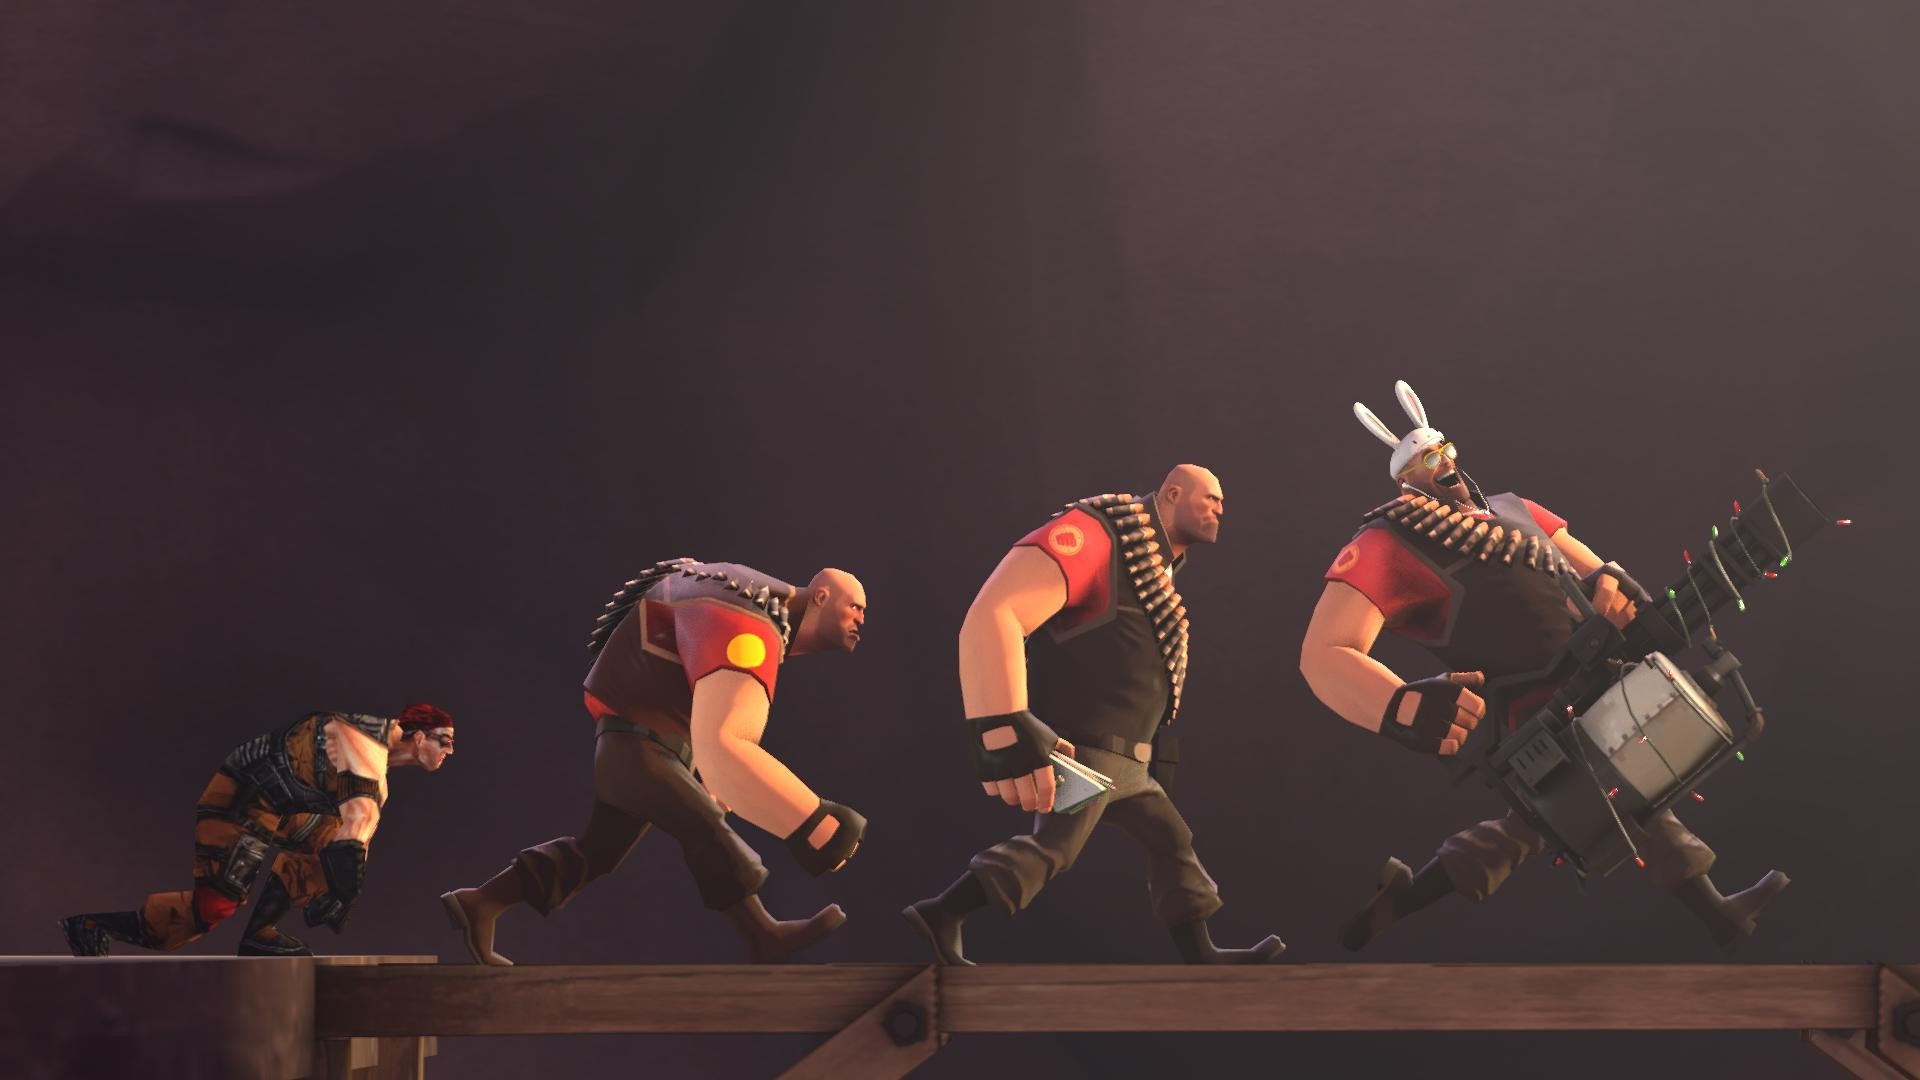 1920x1080 #1506244, team fortress 2 category - wallpaper images team fortress 2